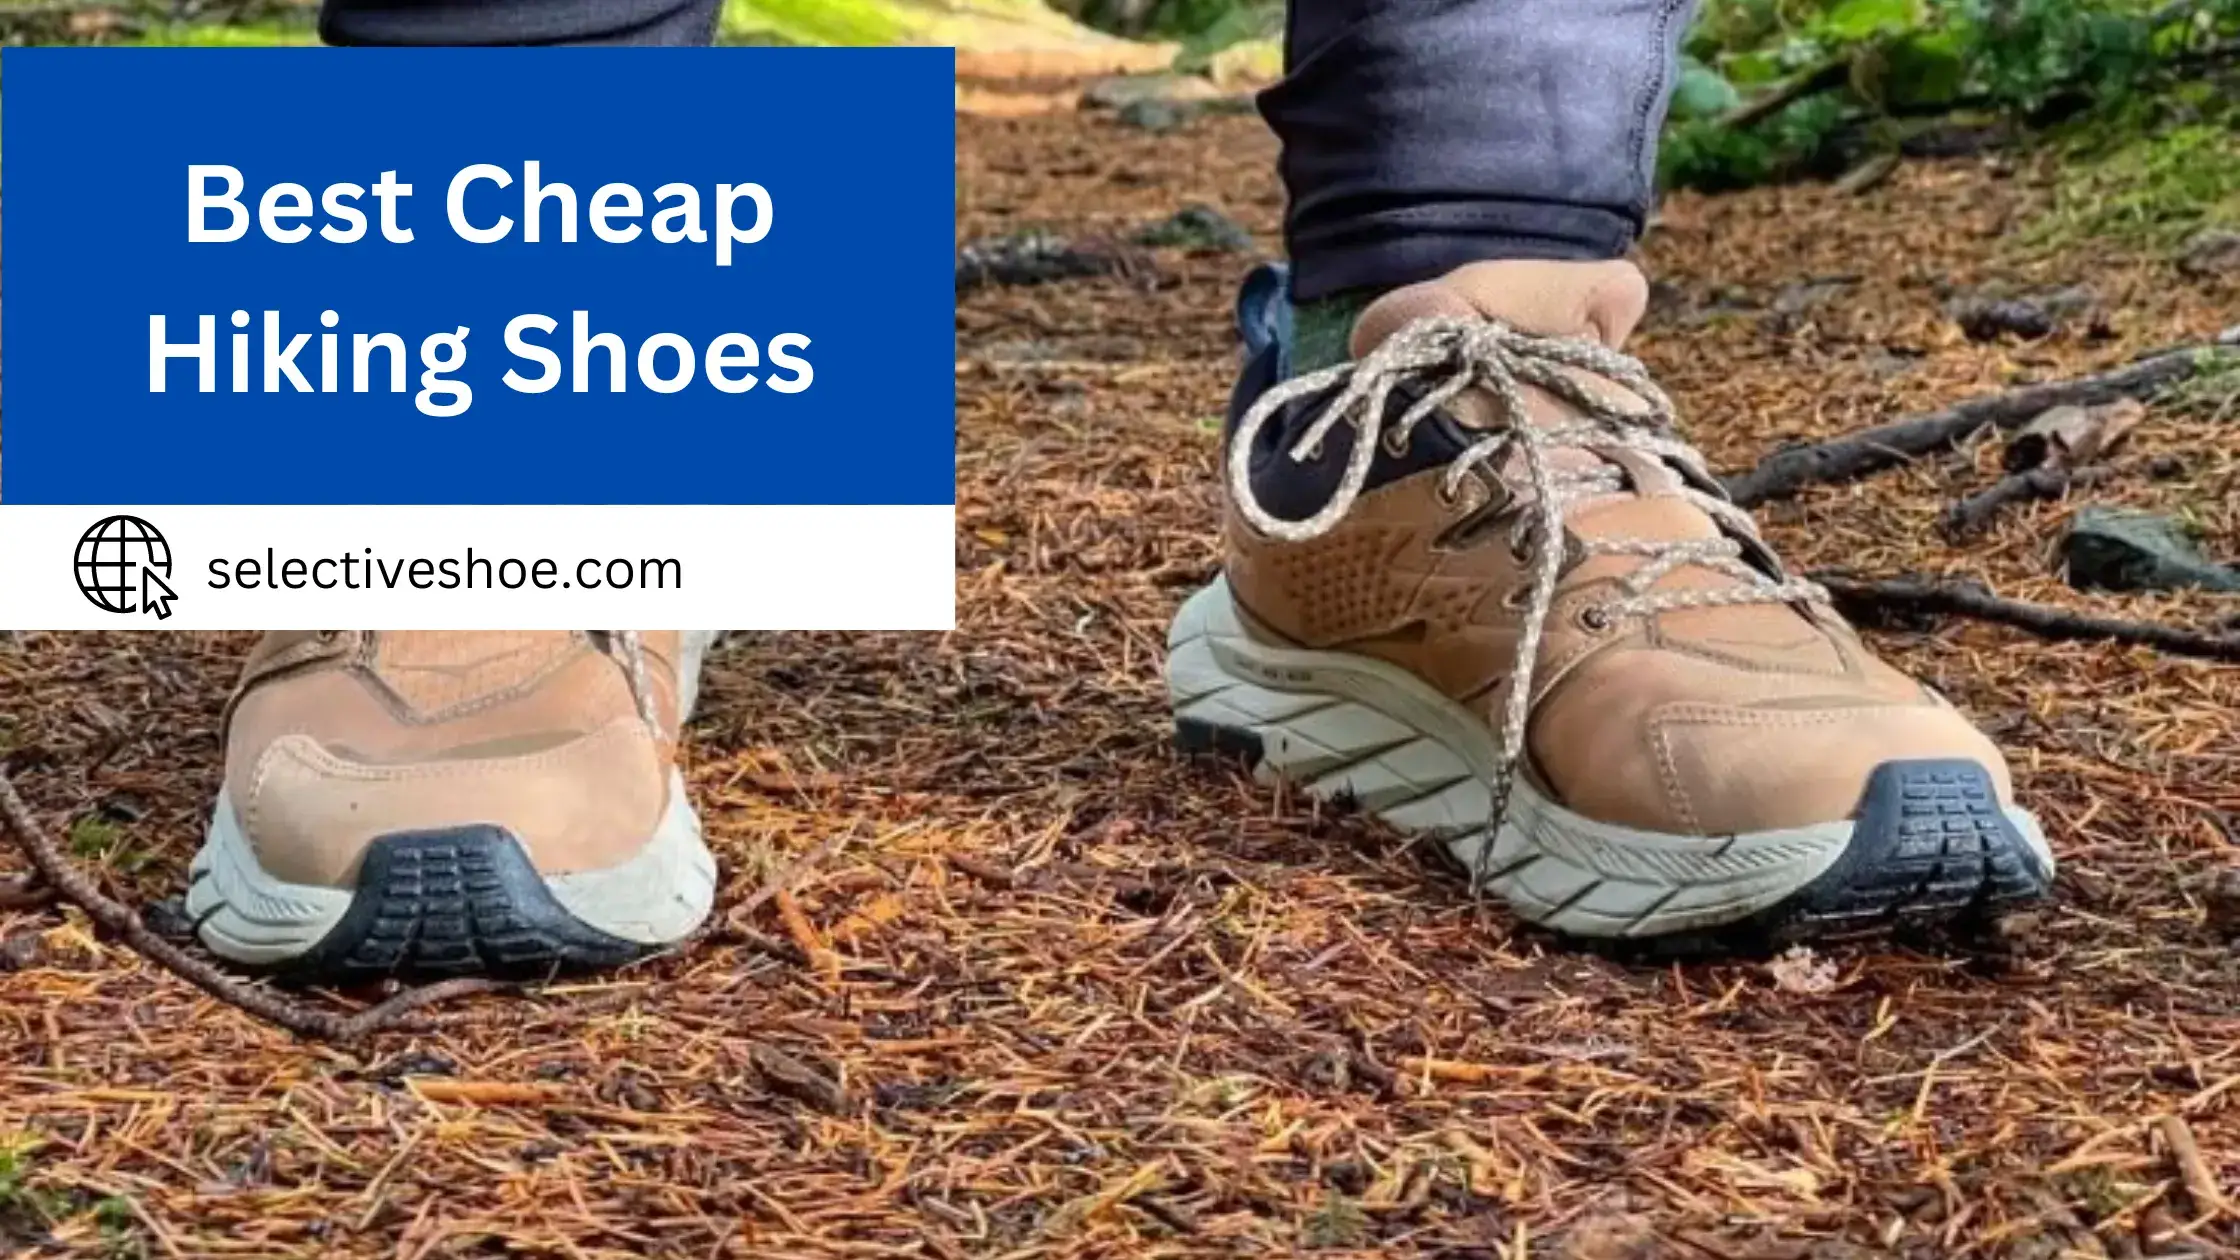 Unbiased Reviews of Top 10 Best Cheap Hiking Shoes